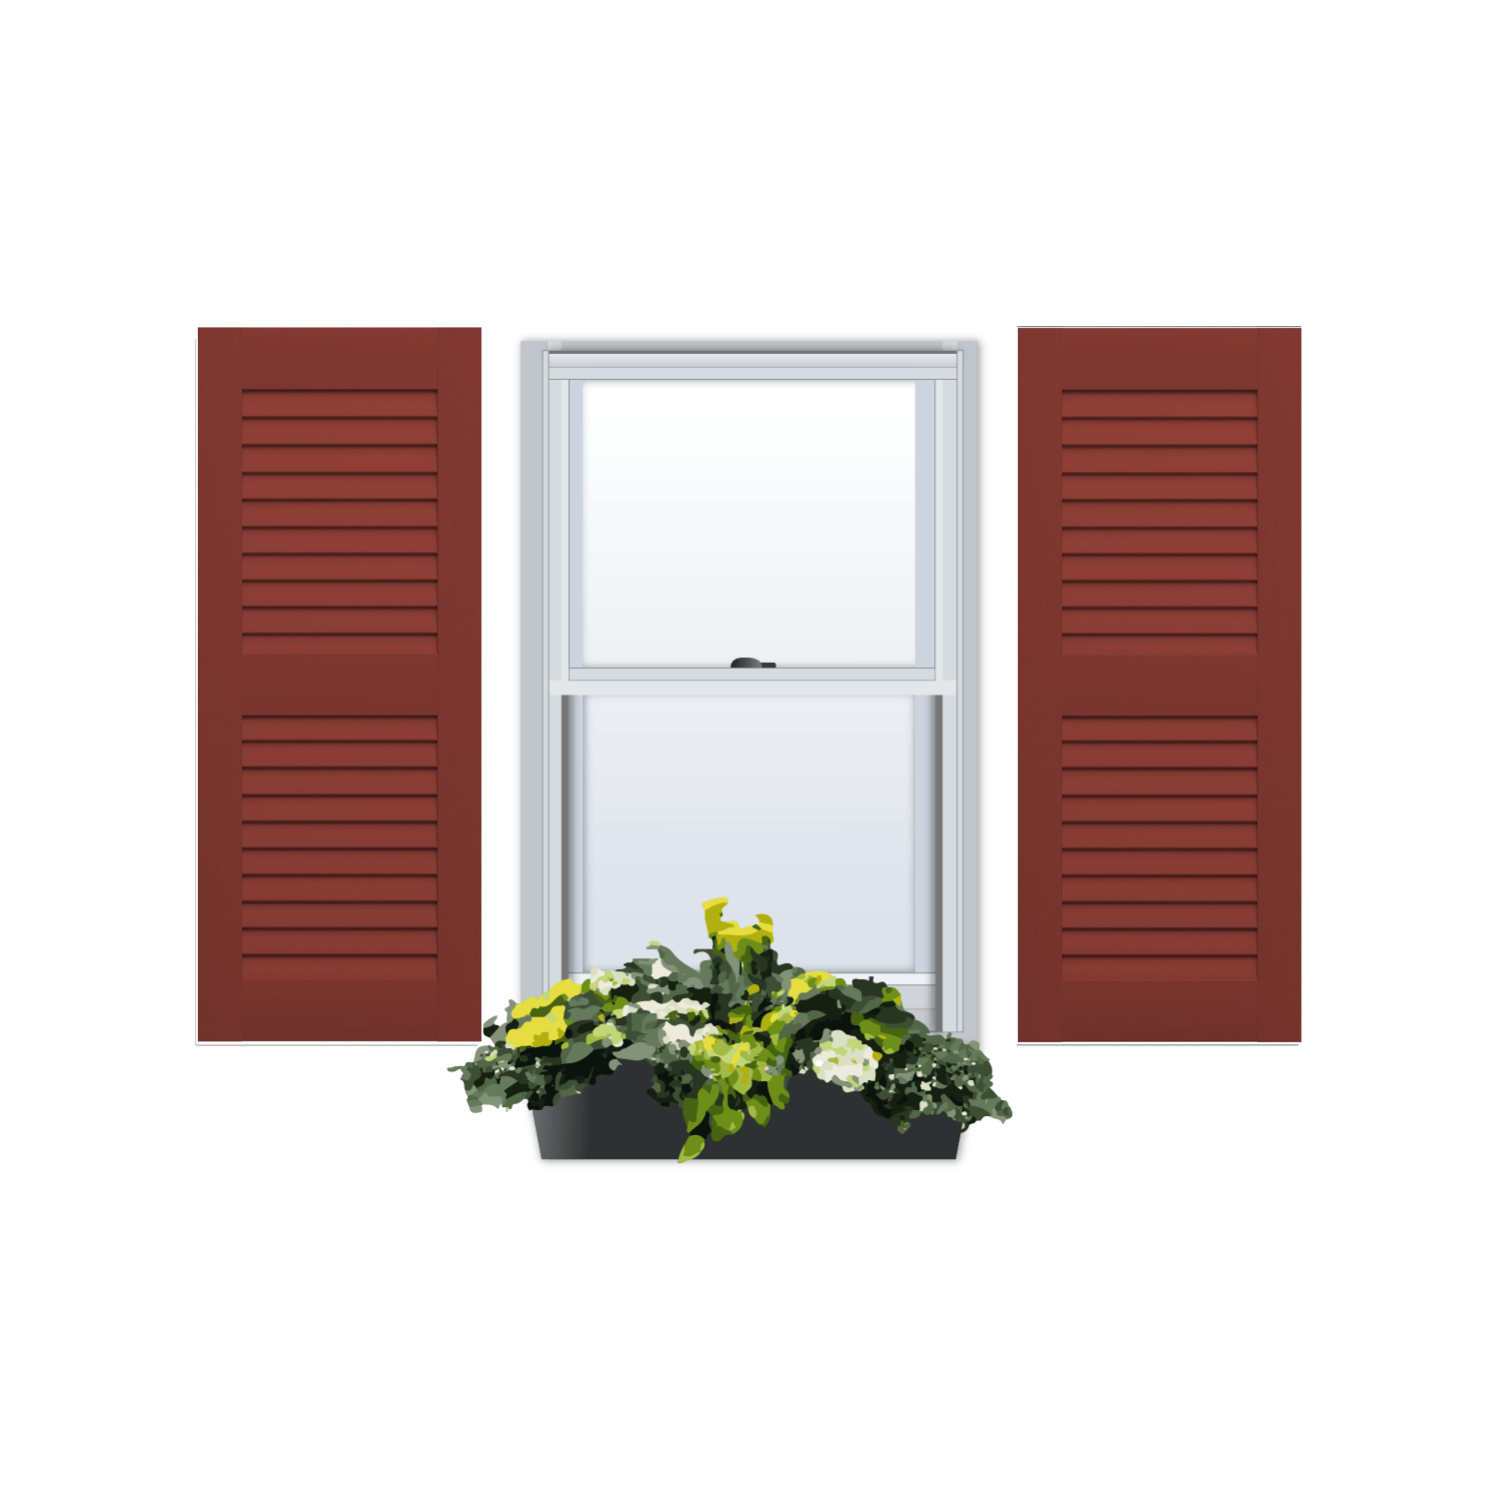 Vinyl | Louvered Exterior Shutters | Two Equal Sections | 1 Pair